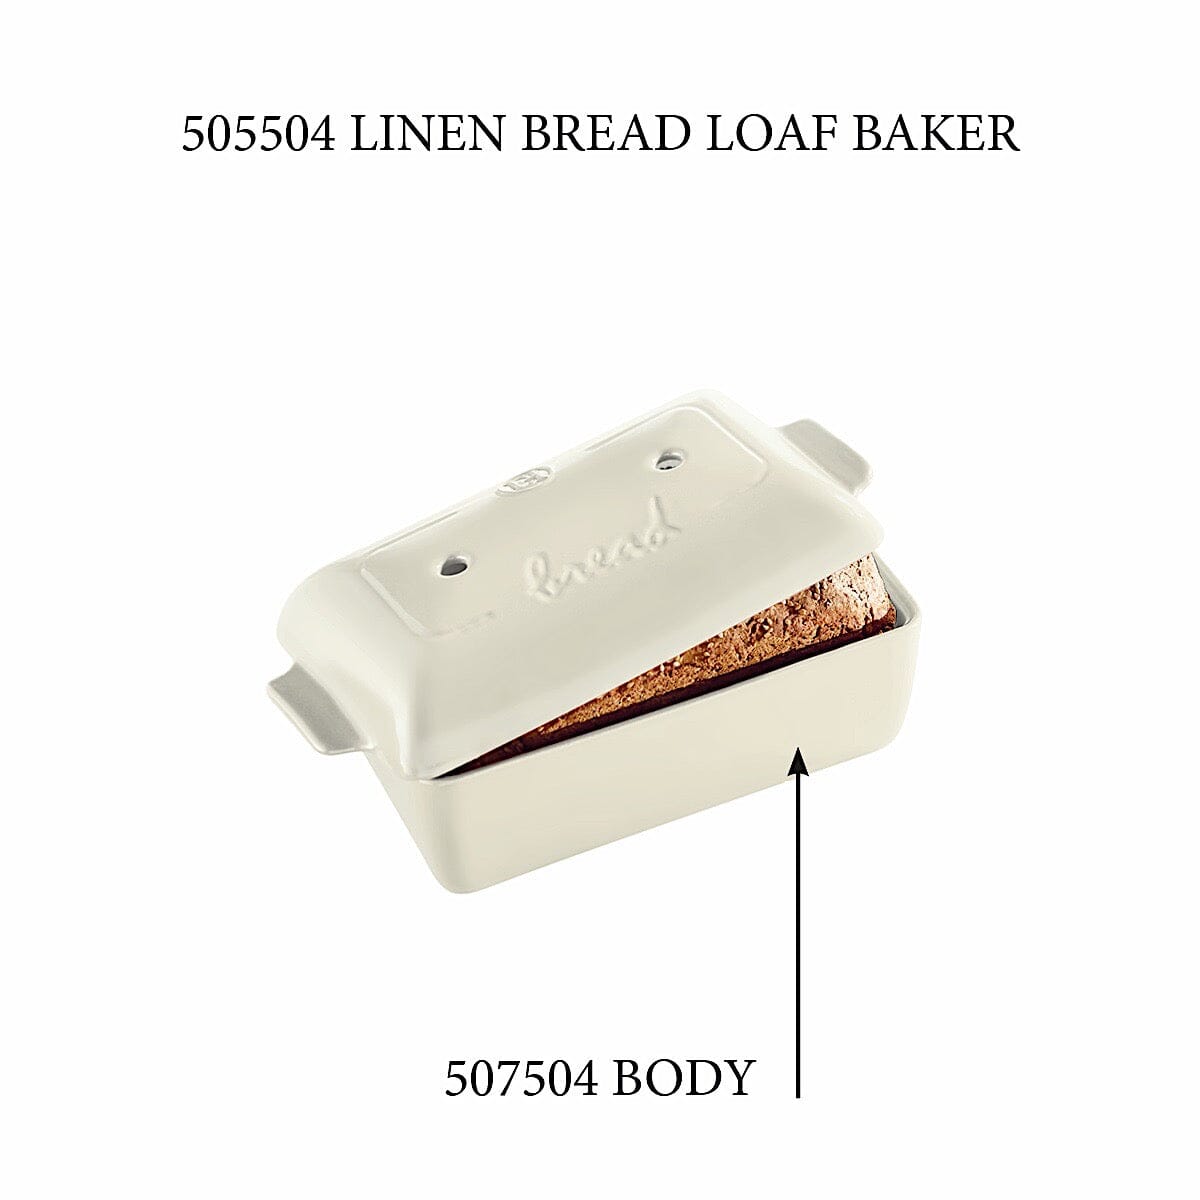 Bread Loaf Baker - Replacement Body